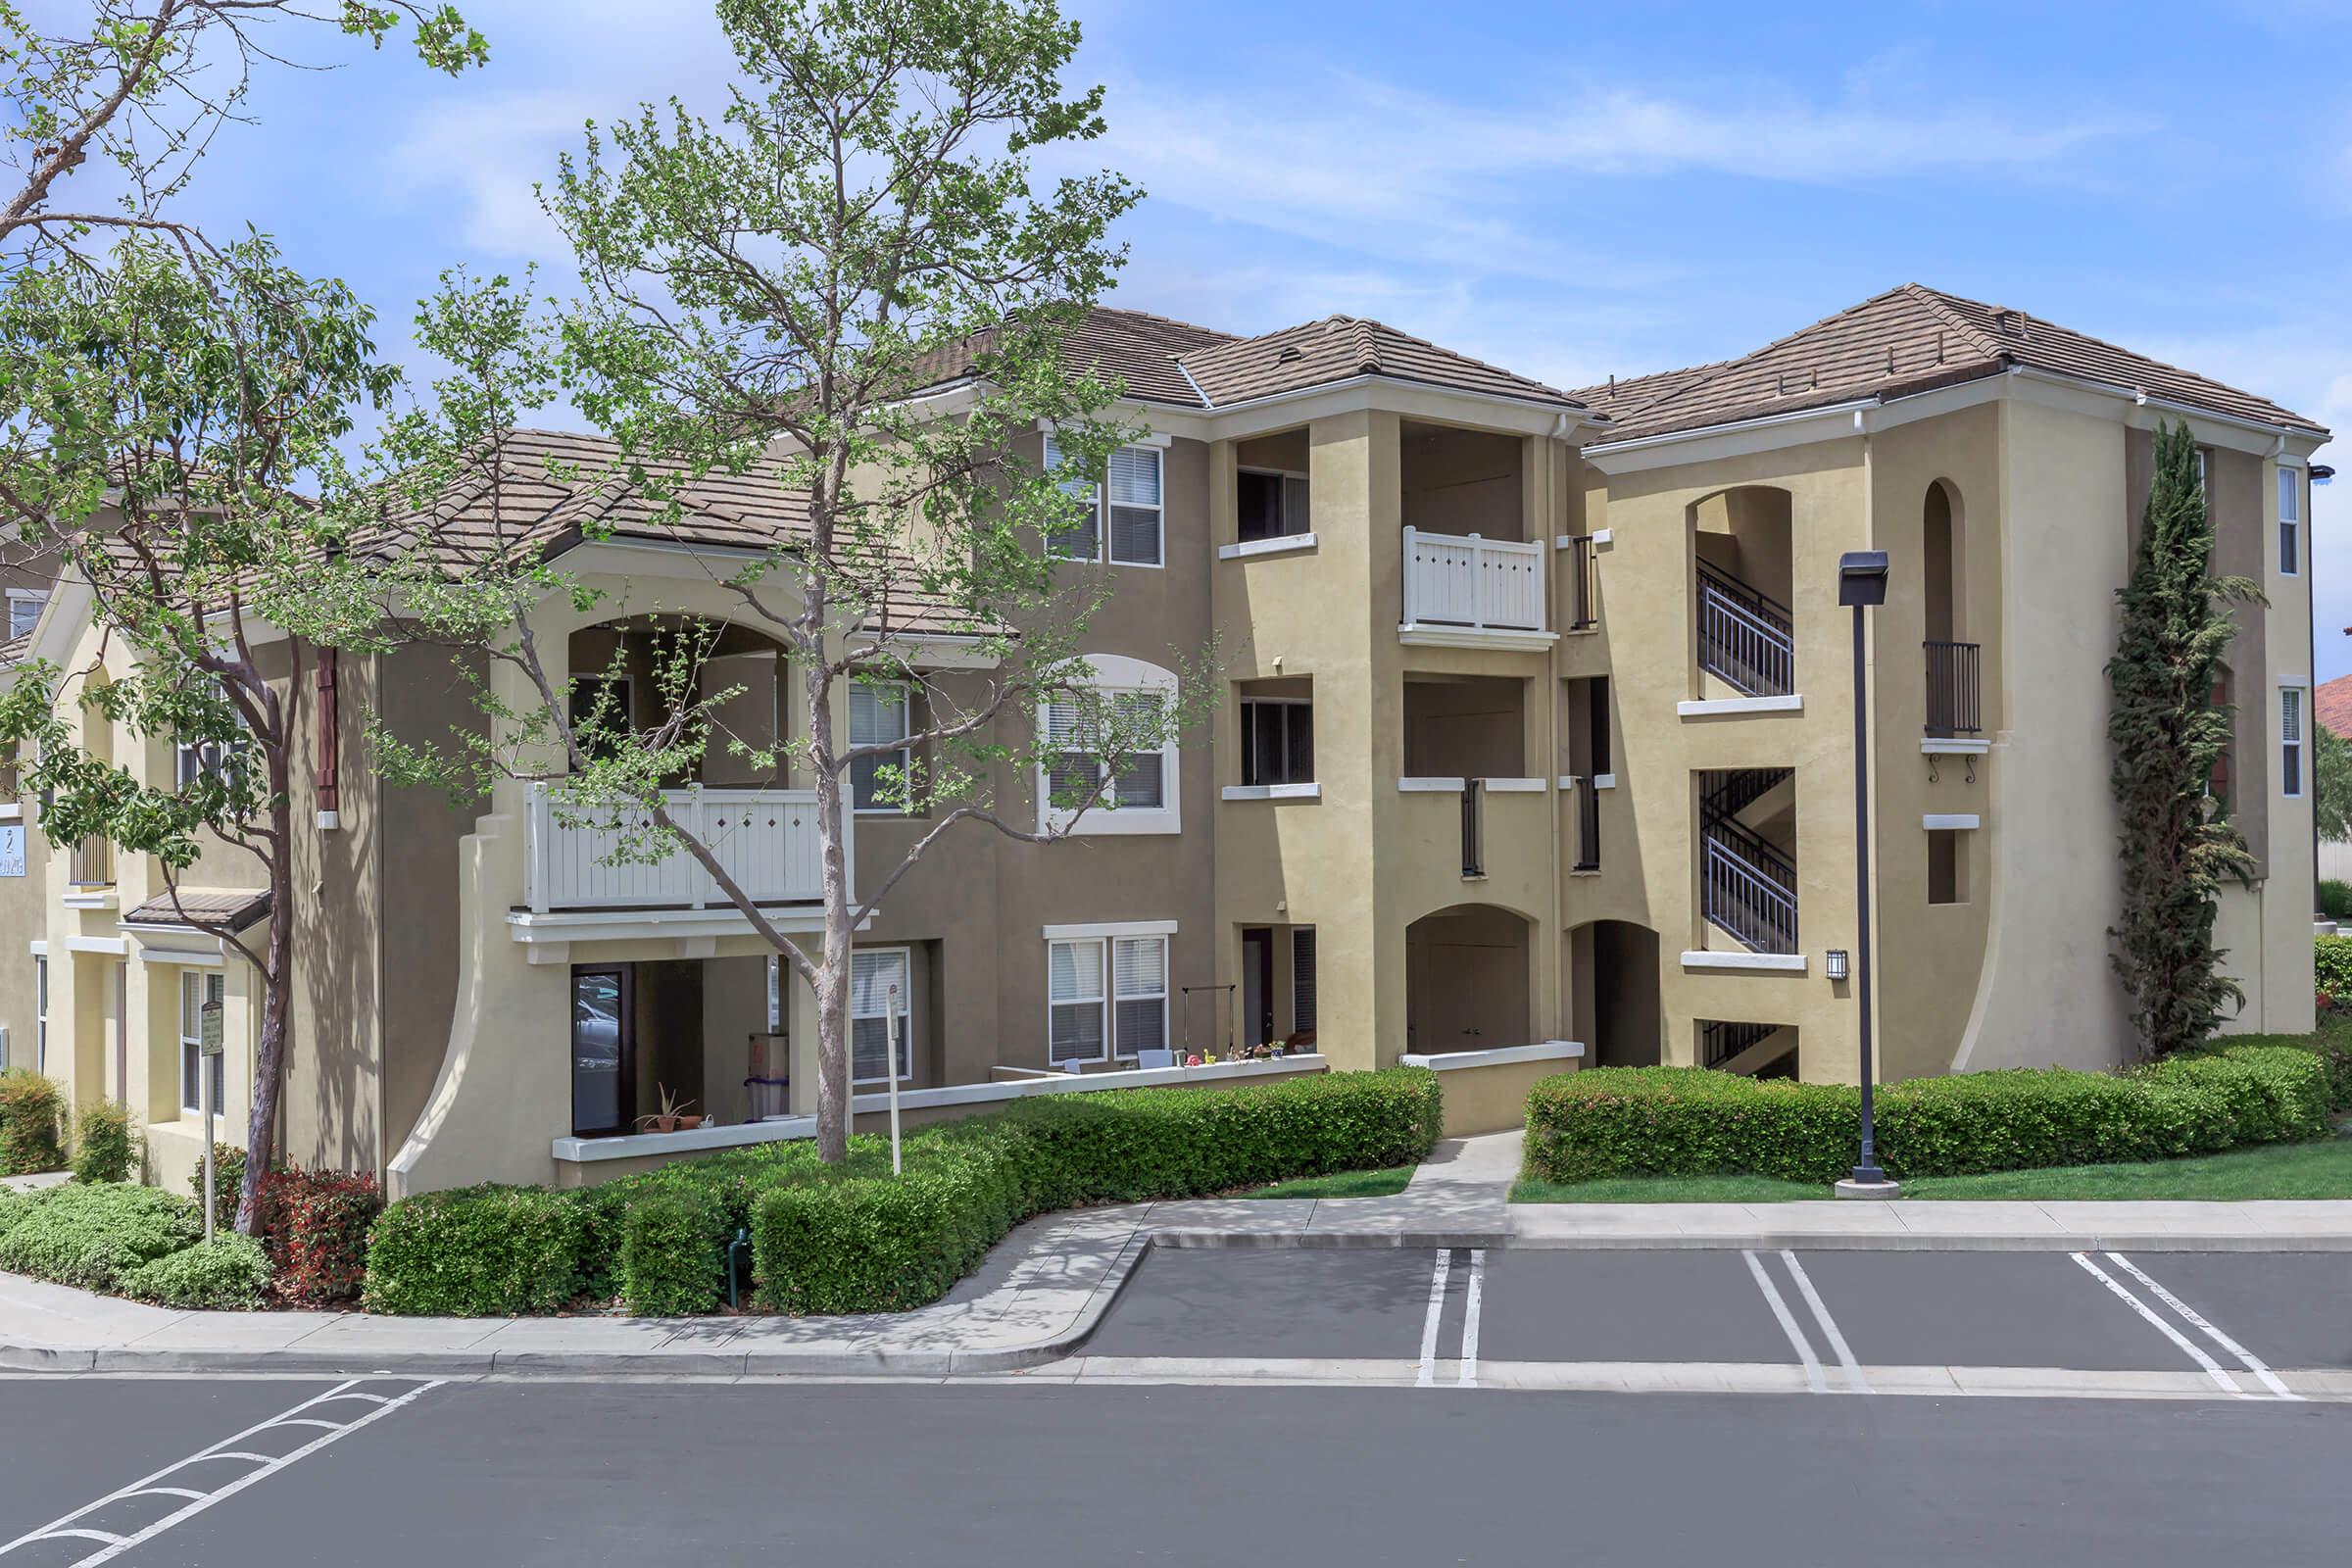 Your new home at Laurel Terrace Apartment Homes